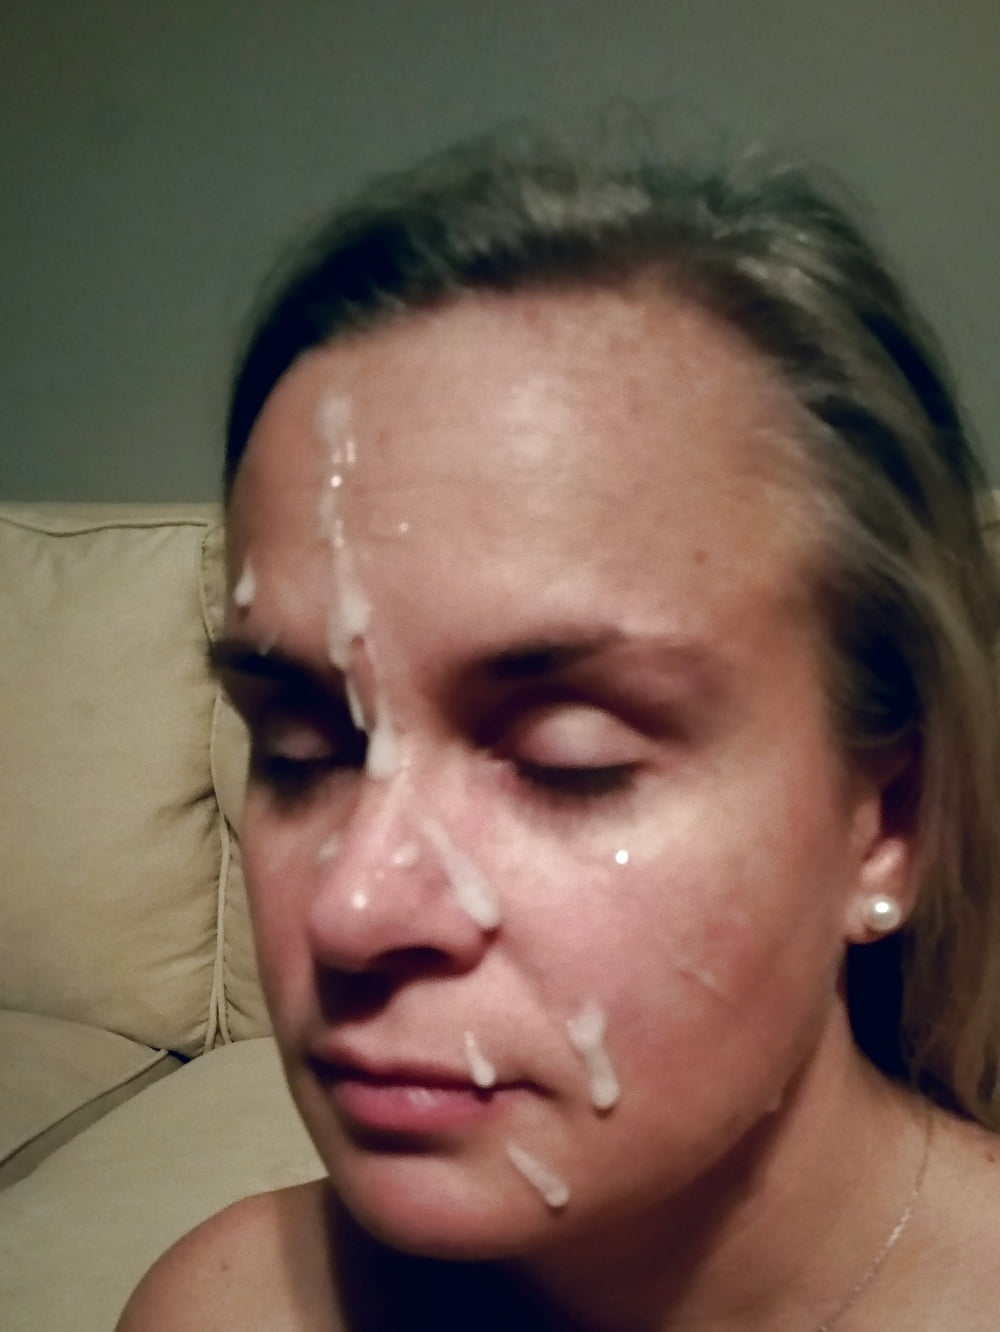 another early morning facial (4/11)